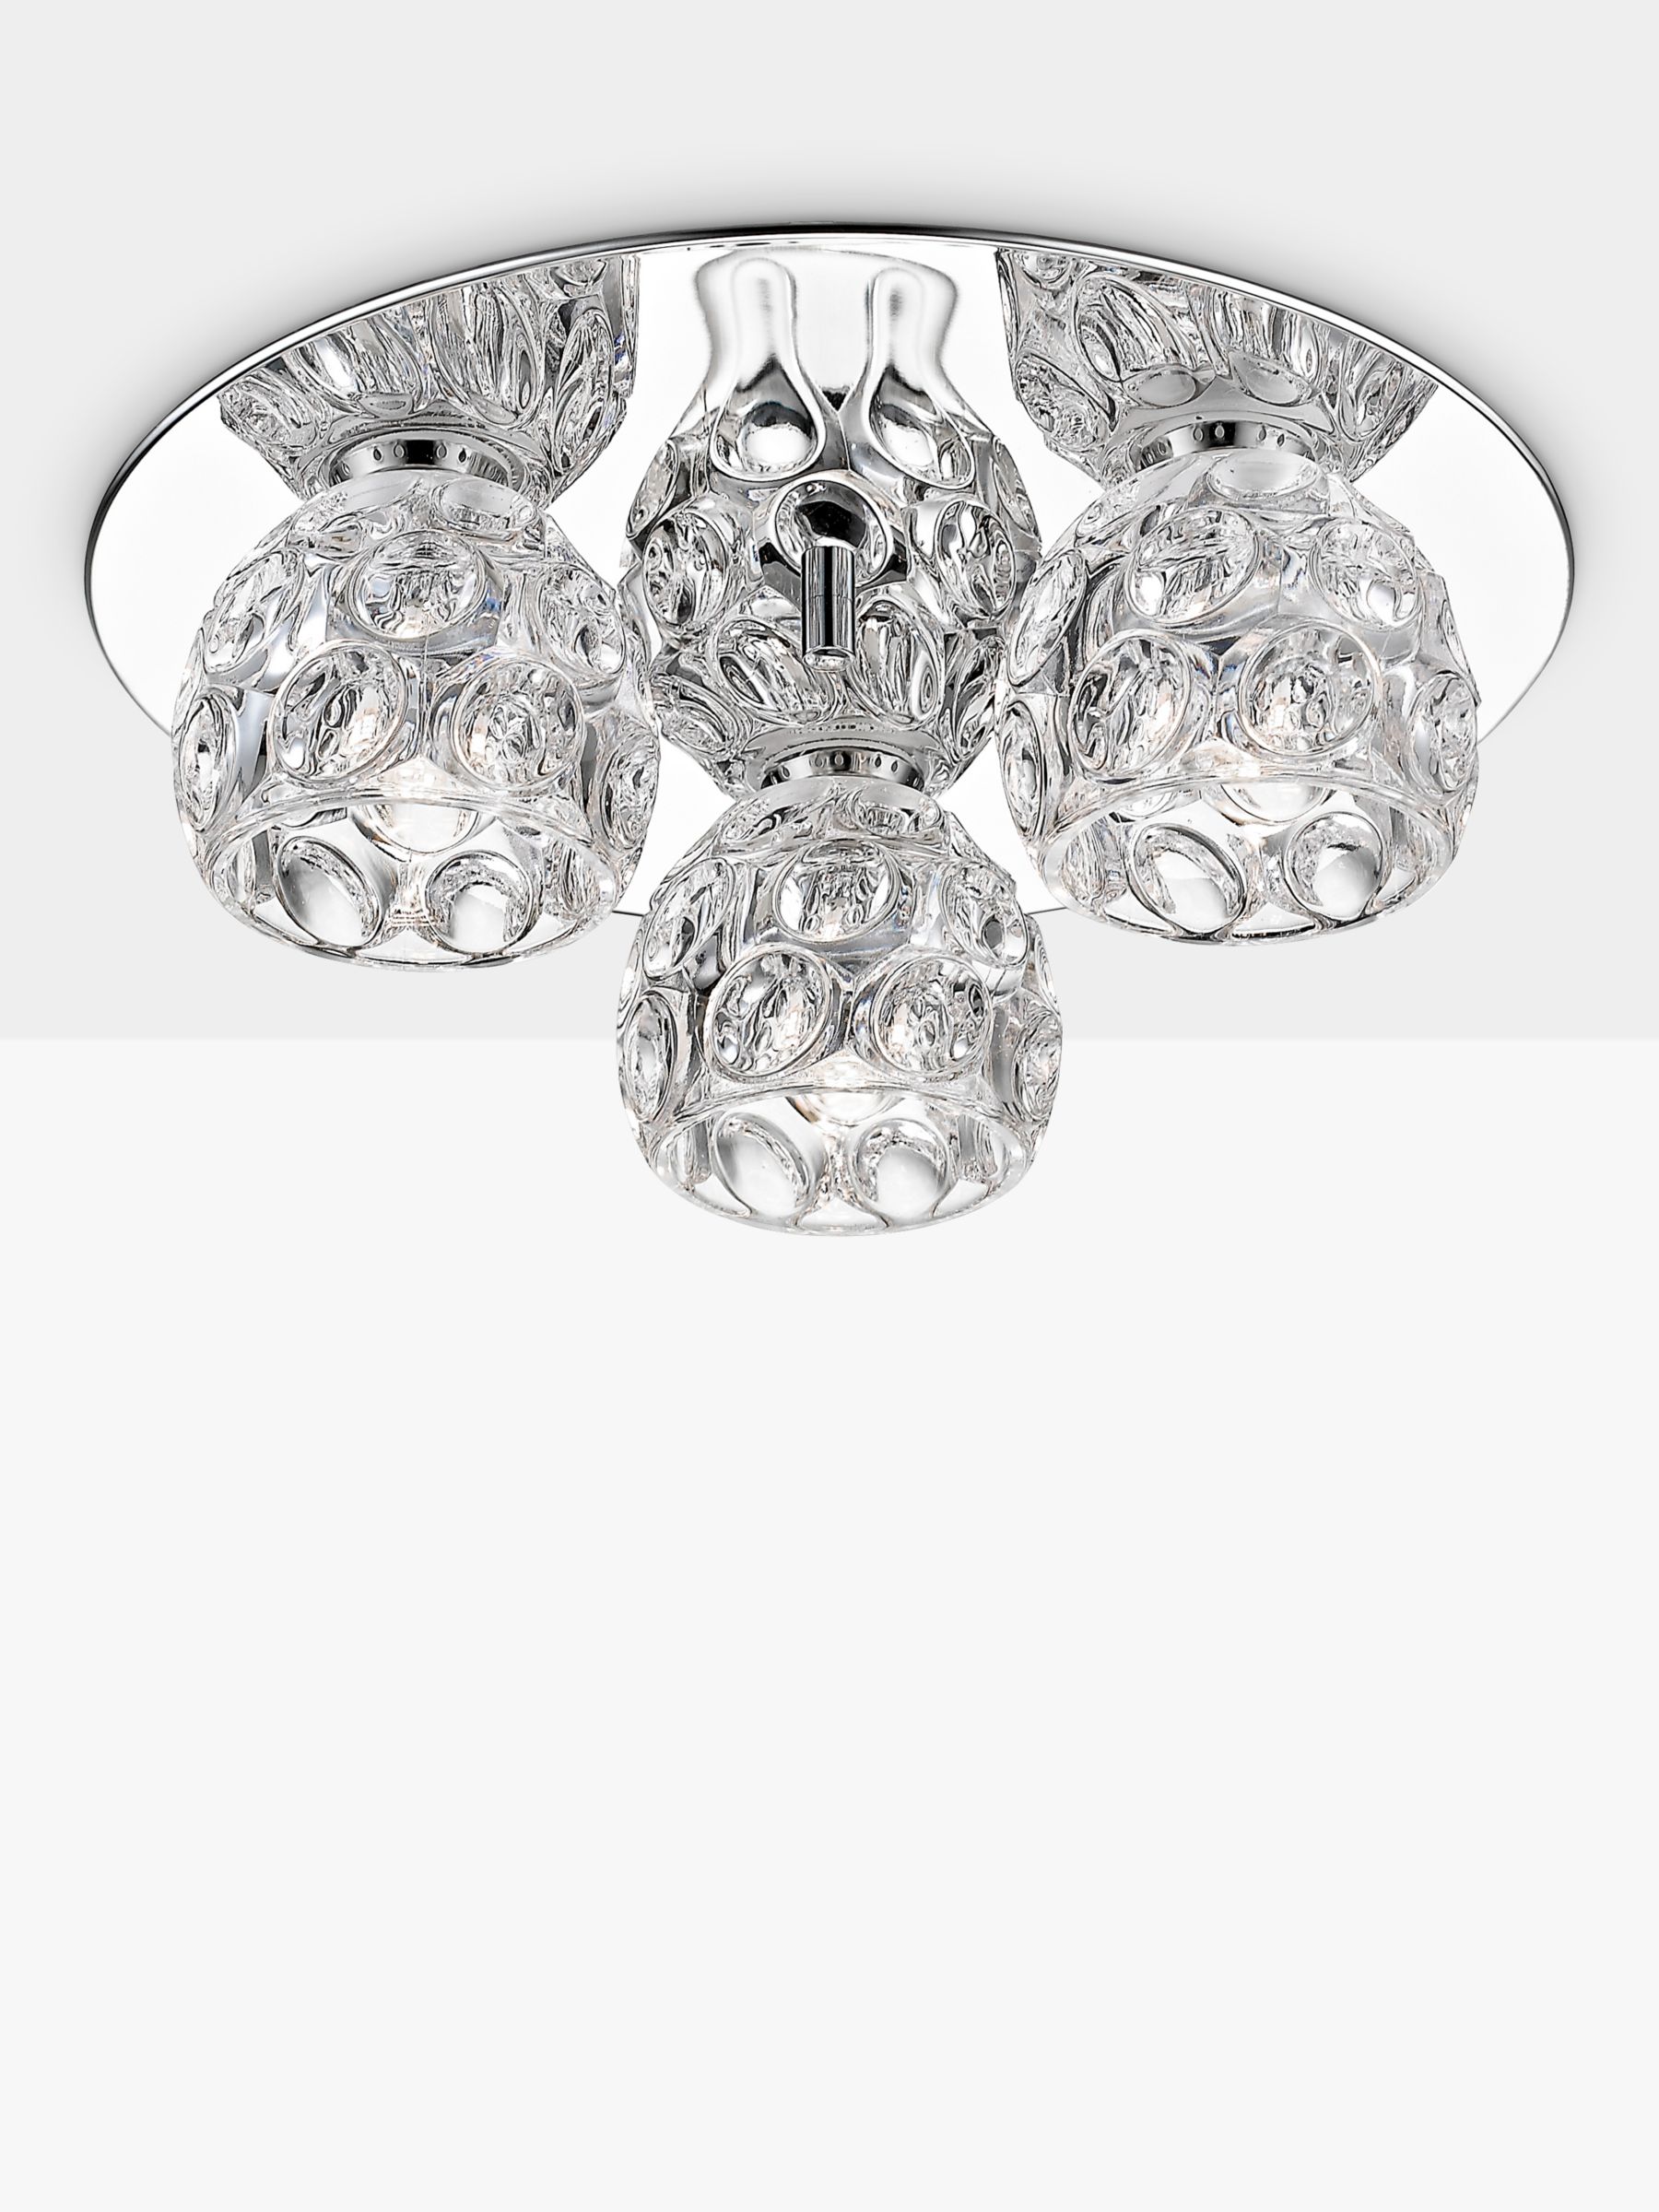 Photo of Impex clea small led crystal semi flush ceiling light clear/chrome